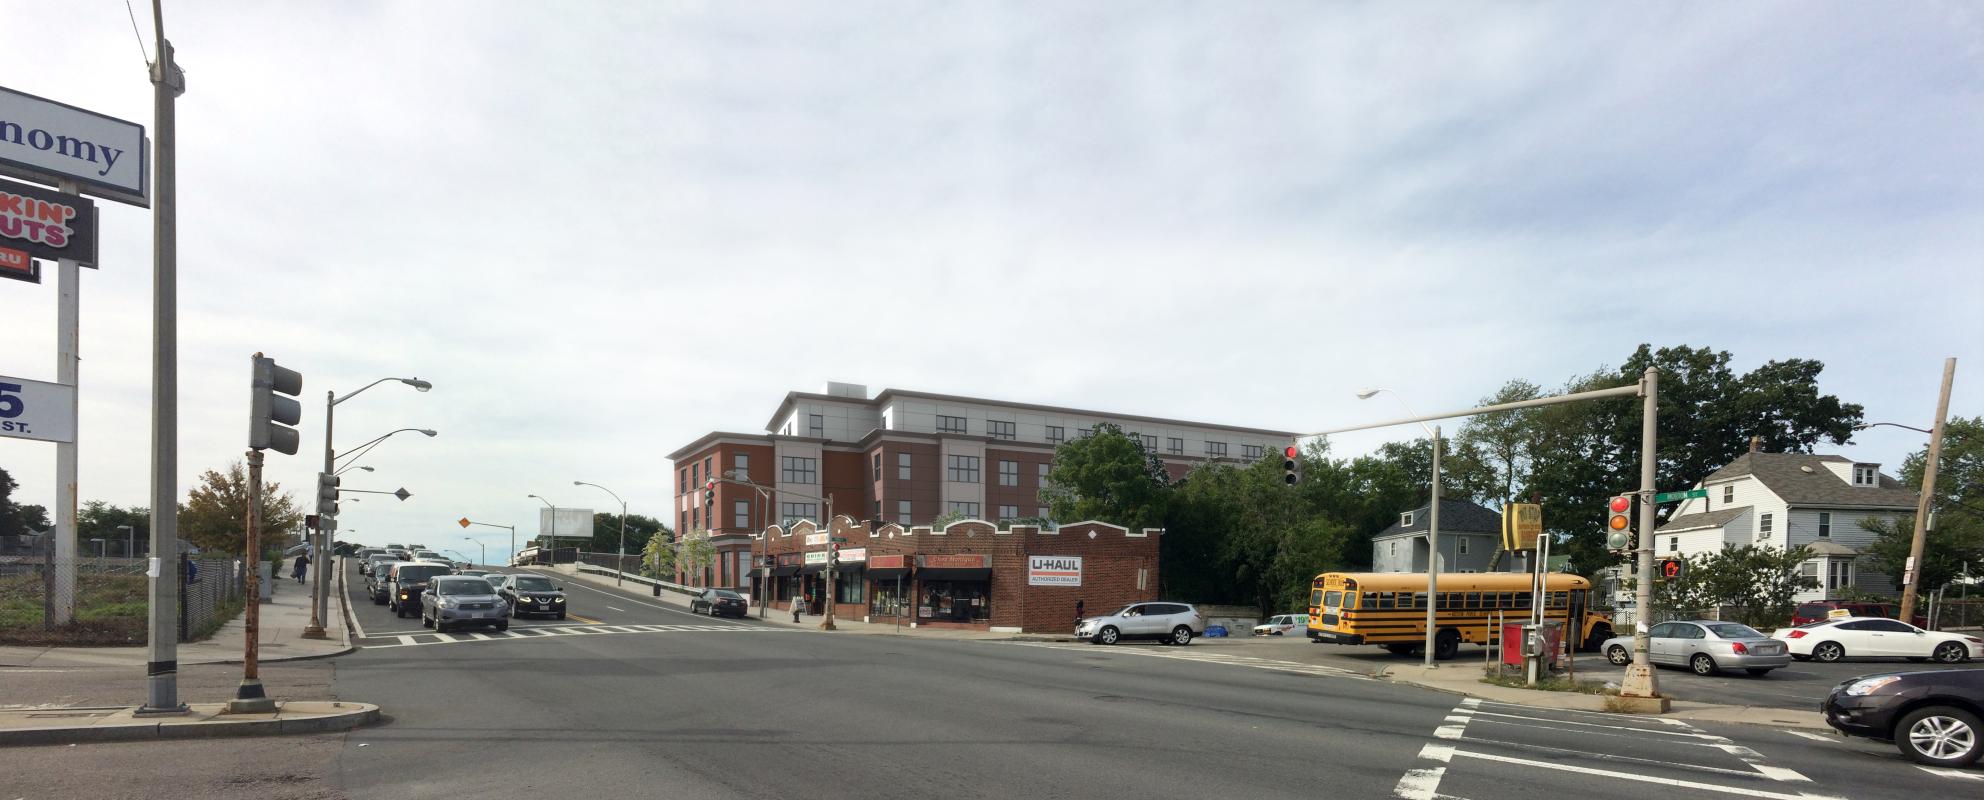 Rendering of exterior view from street